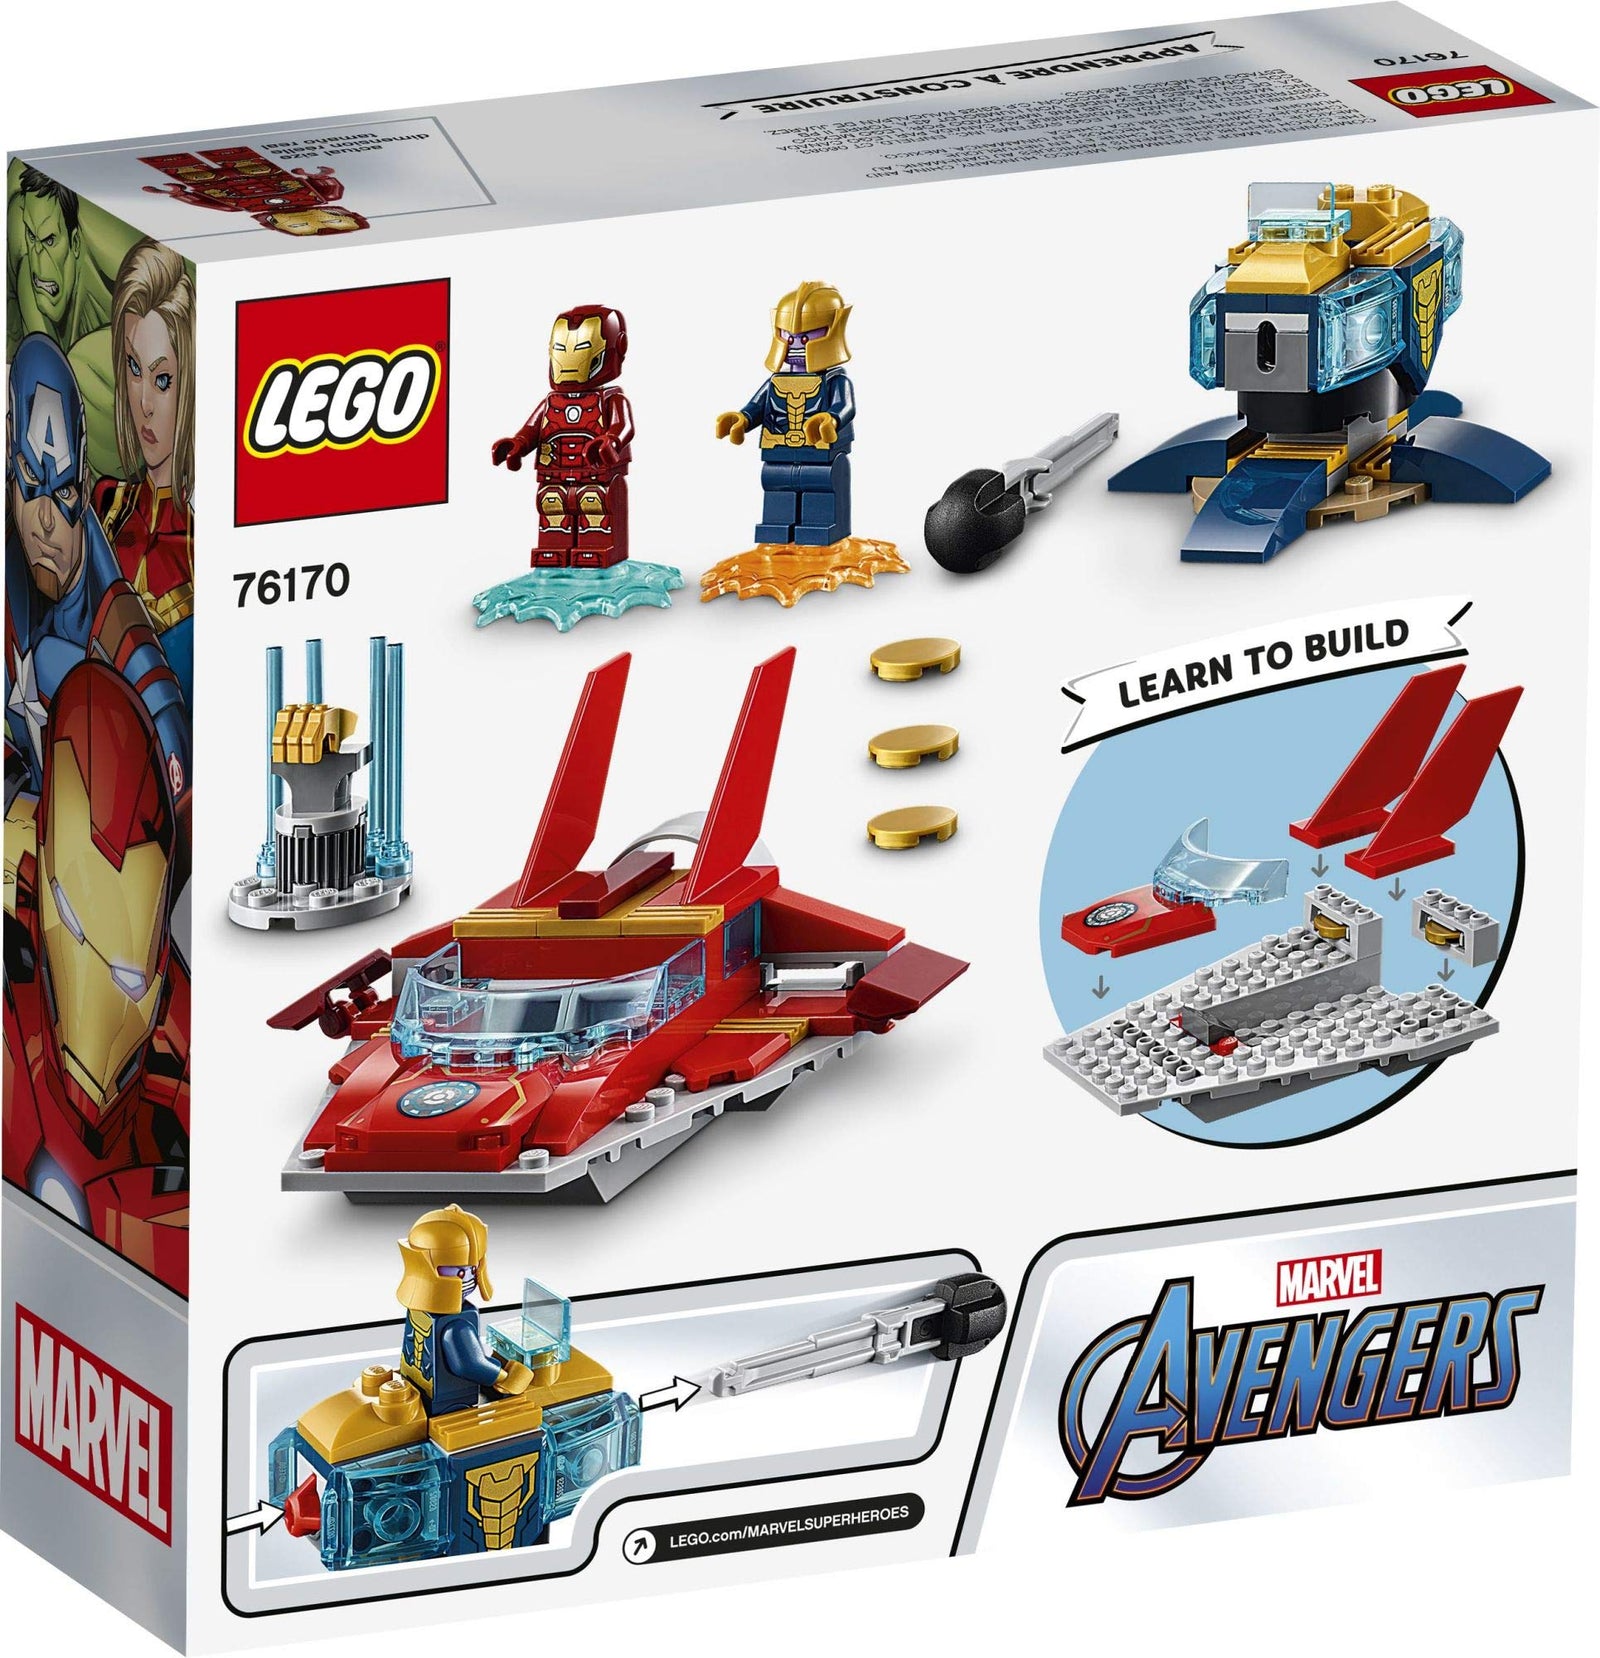 LEGO Marvel Avengers Iron Man vs. Thanos 76170 Cool, Collectible Superhero Building Toy for Kids Featuring Marvel Avengers Iron Man and Thanos Minifigures, New 2021 (103 Pieces)